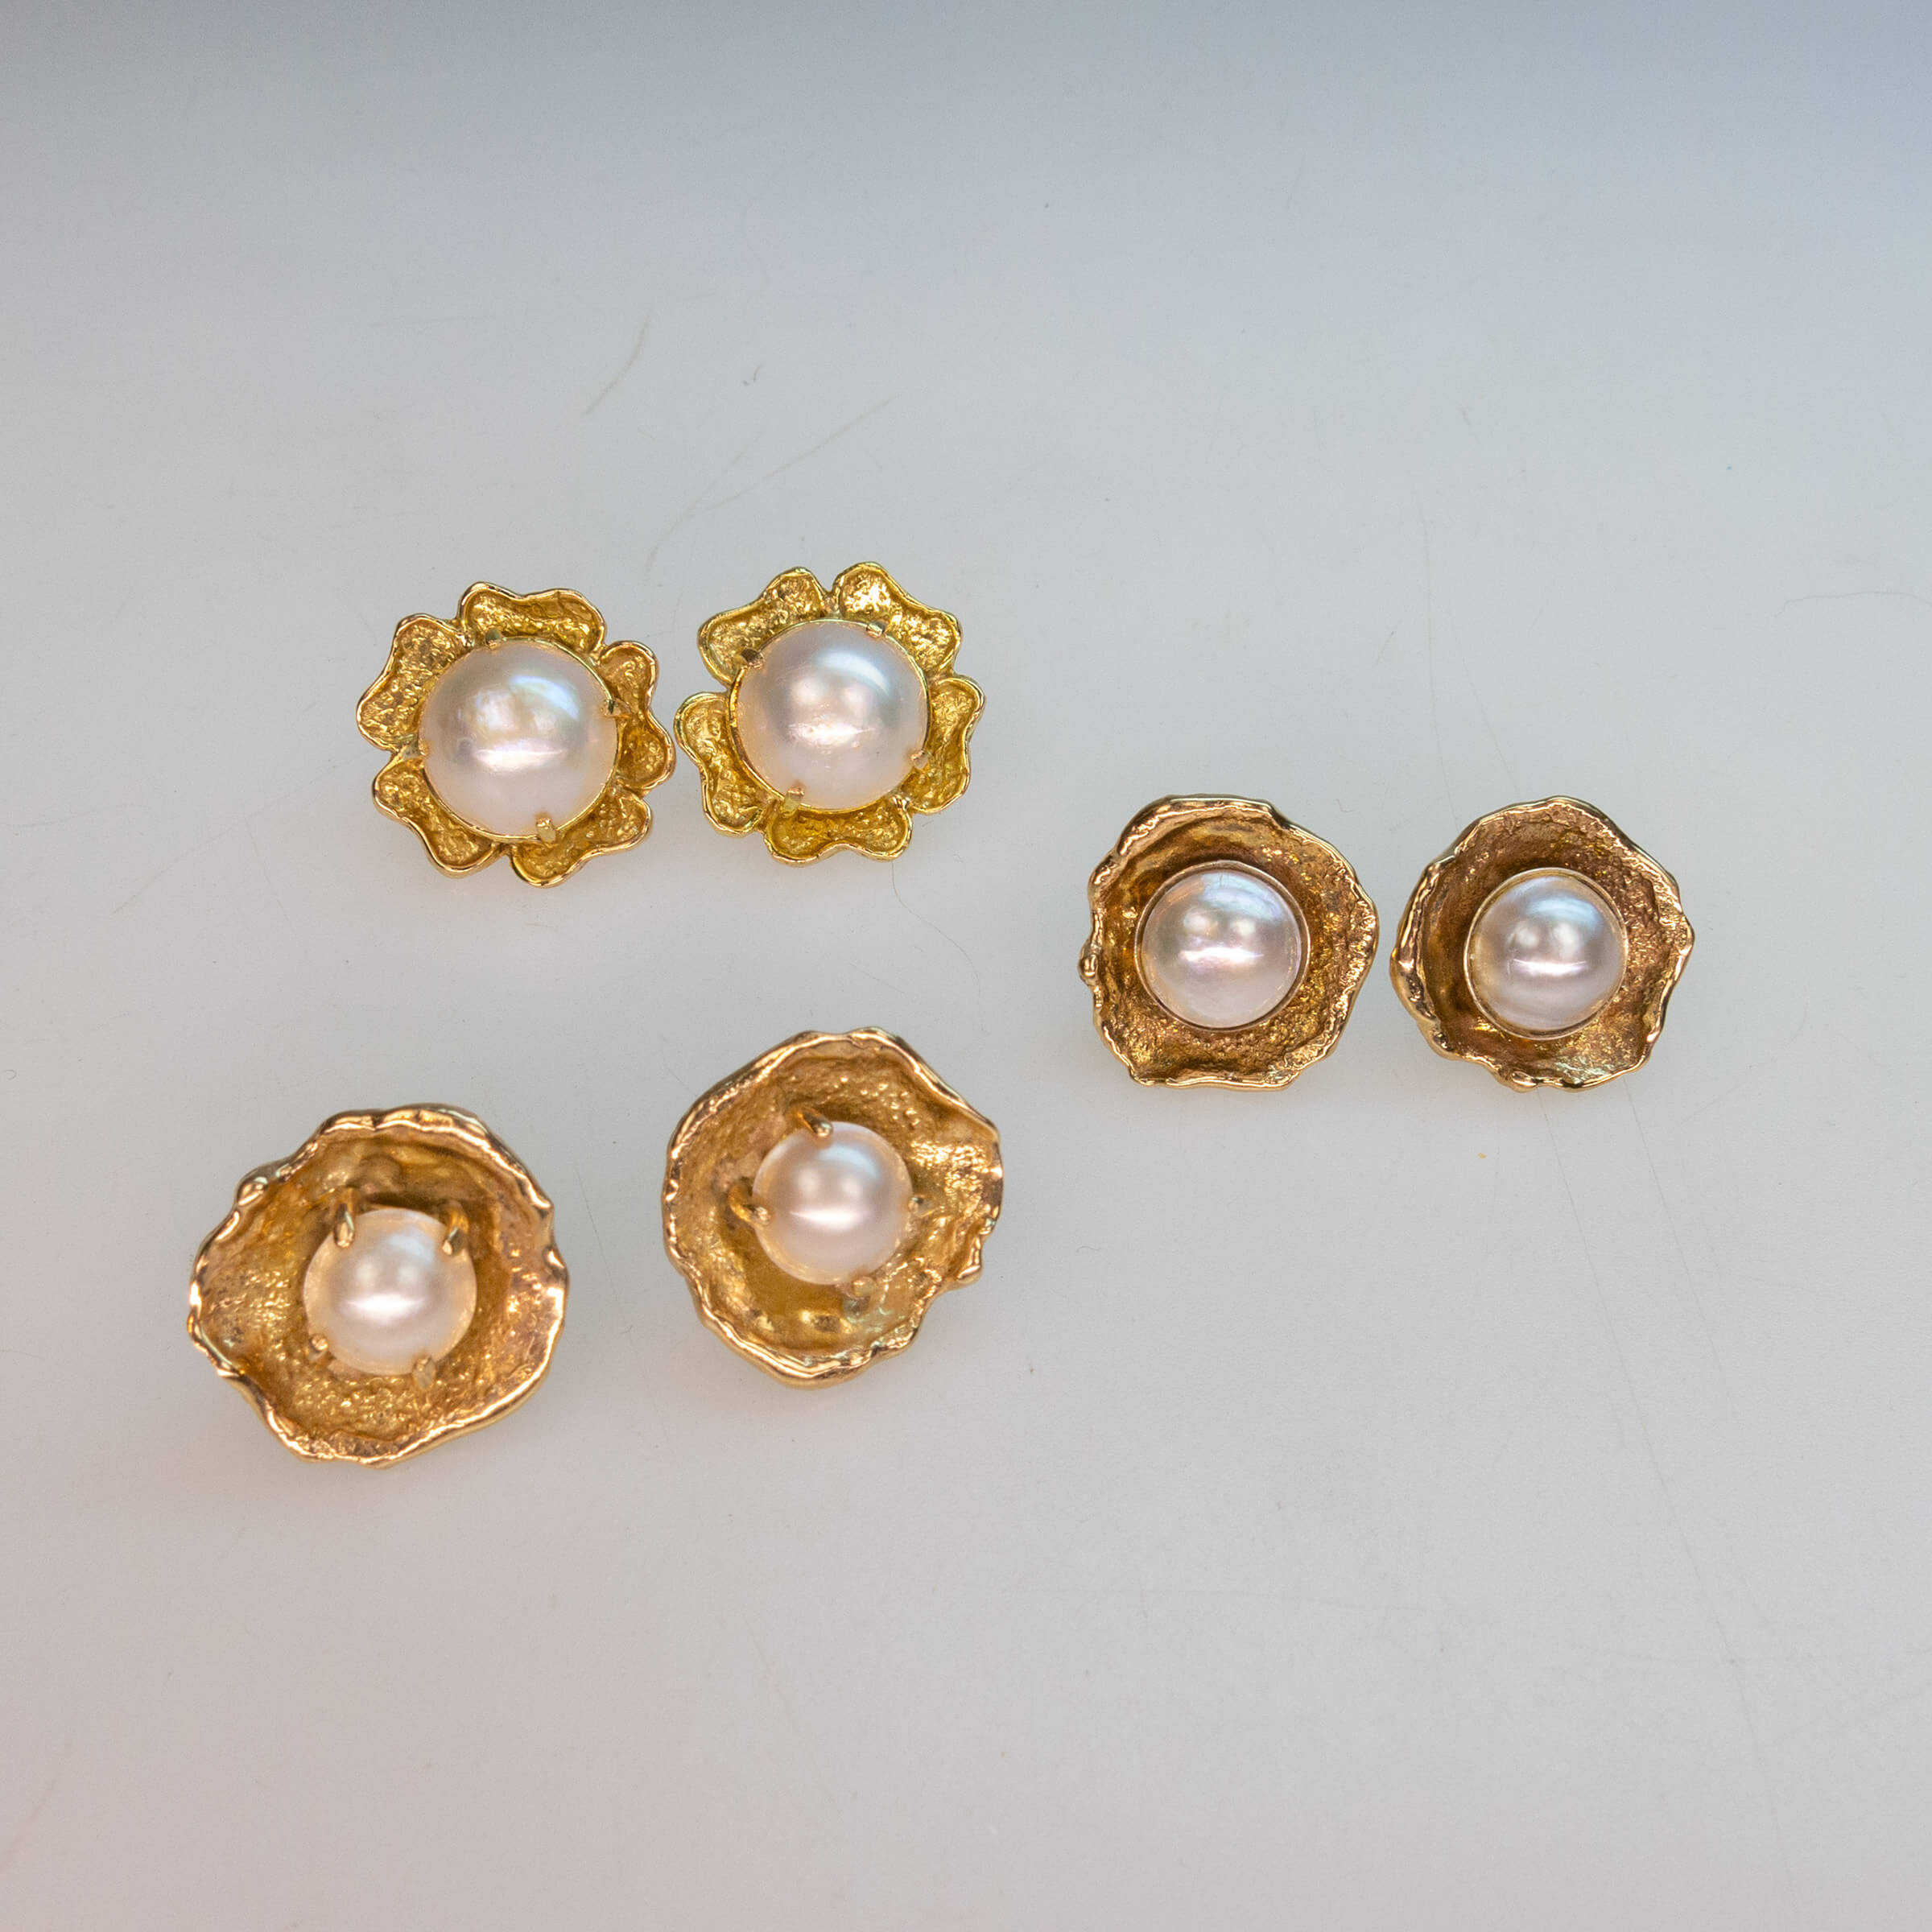 3 Pairs Of 14k Yellow Gold Button Earrings